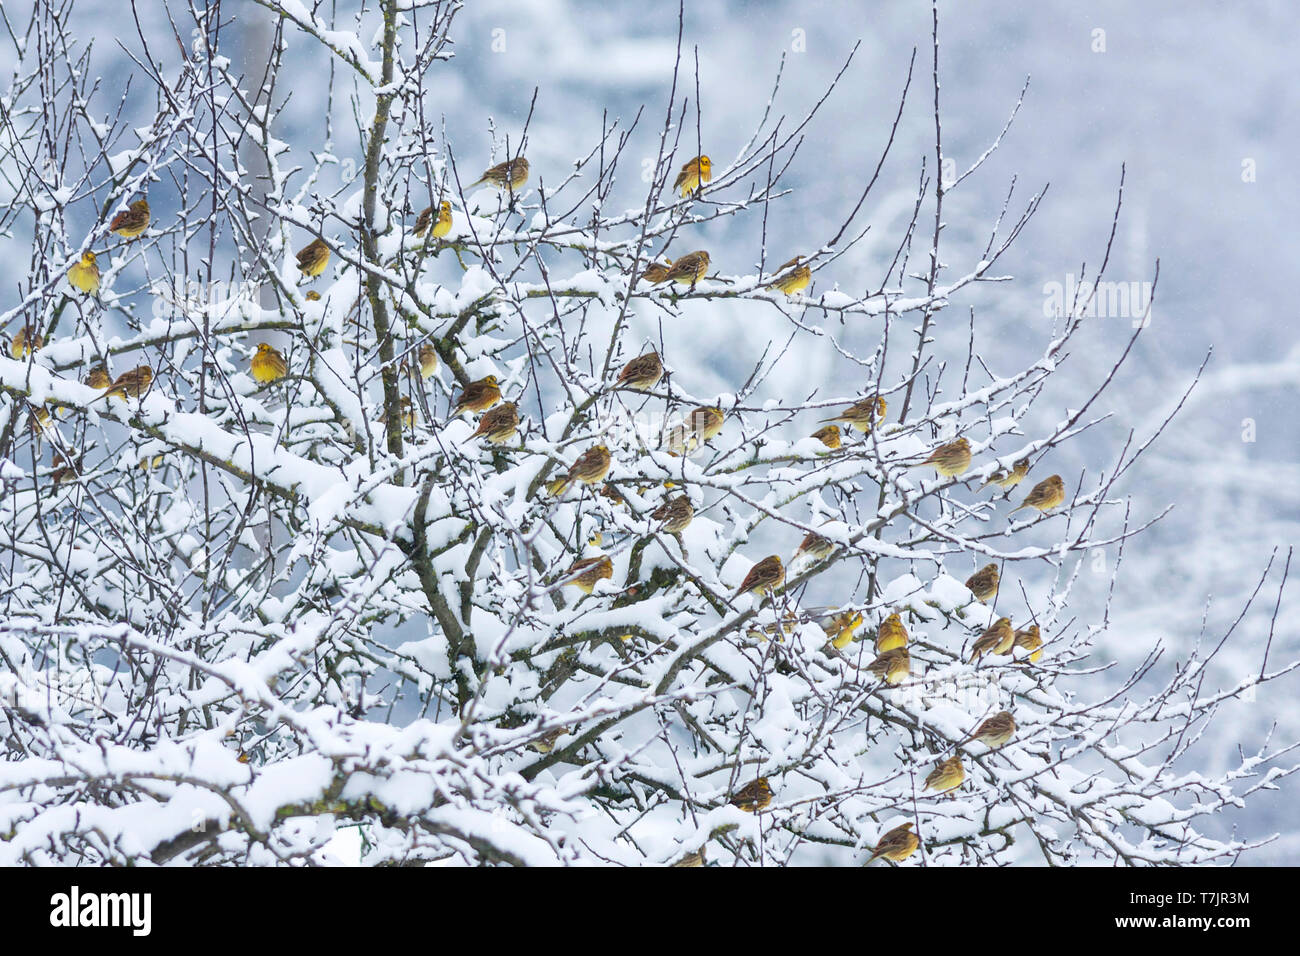 Flock of Yellowhammers (Emberiza citrinella ssp. citrinella) wintering in Germany. Stock Photo